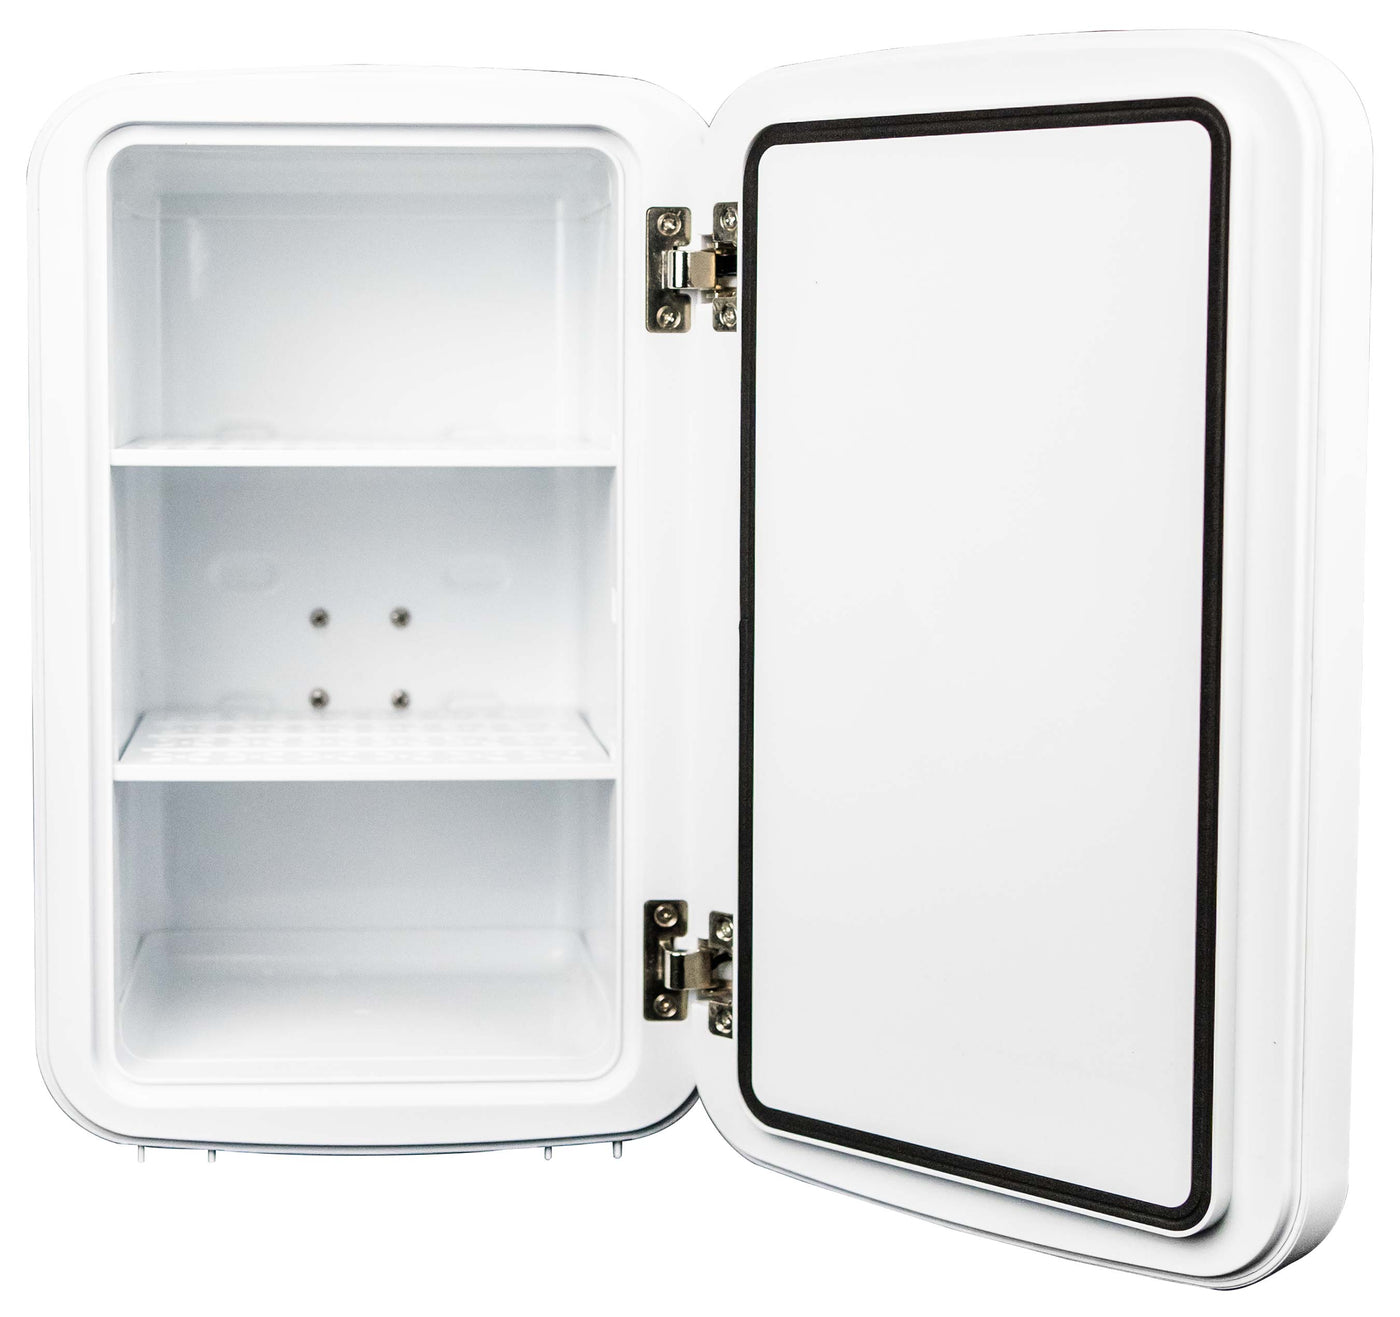 Danby White Mini Cosmetic Fridge with Mirror and Light (7.4 L) - DBMR02624WD43